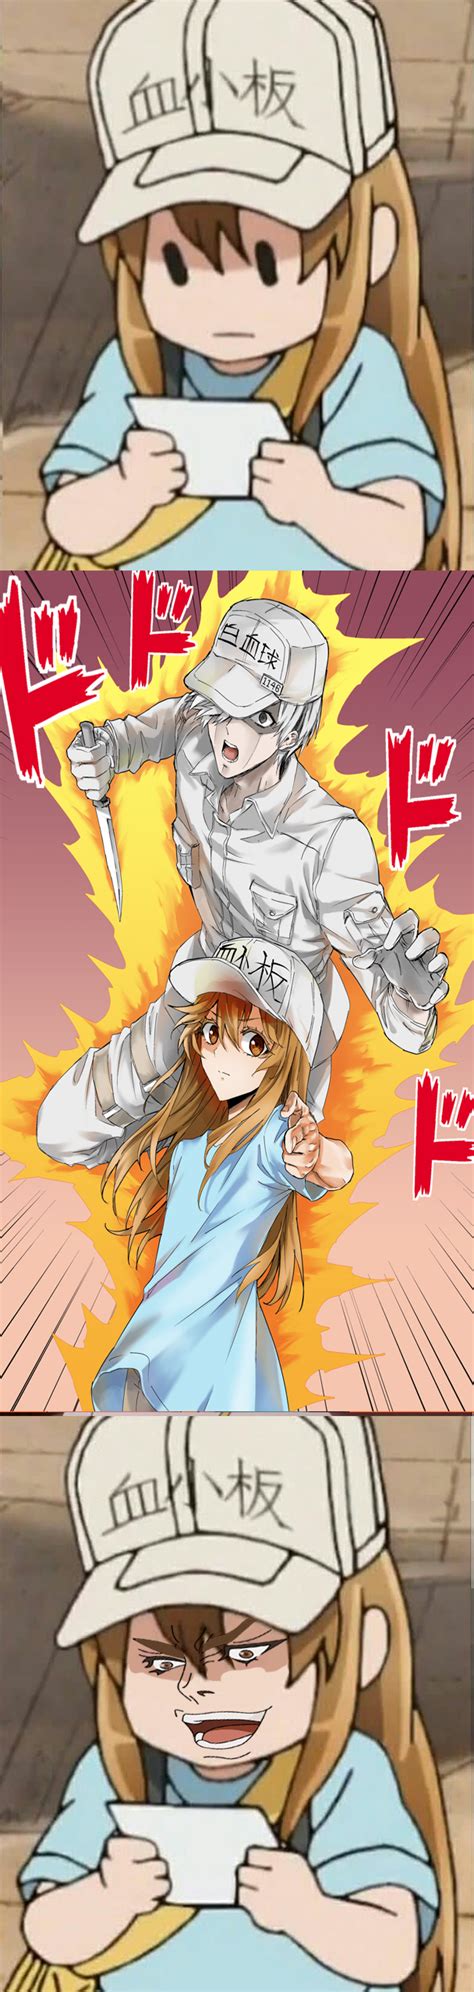 You Thought It Was Gonna Be Another Platelet Meme But It Was Me Dio